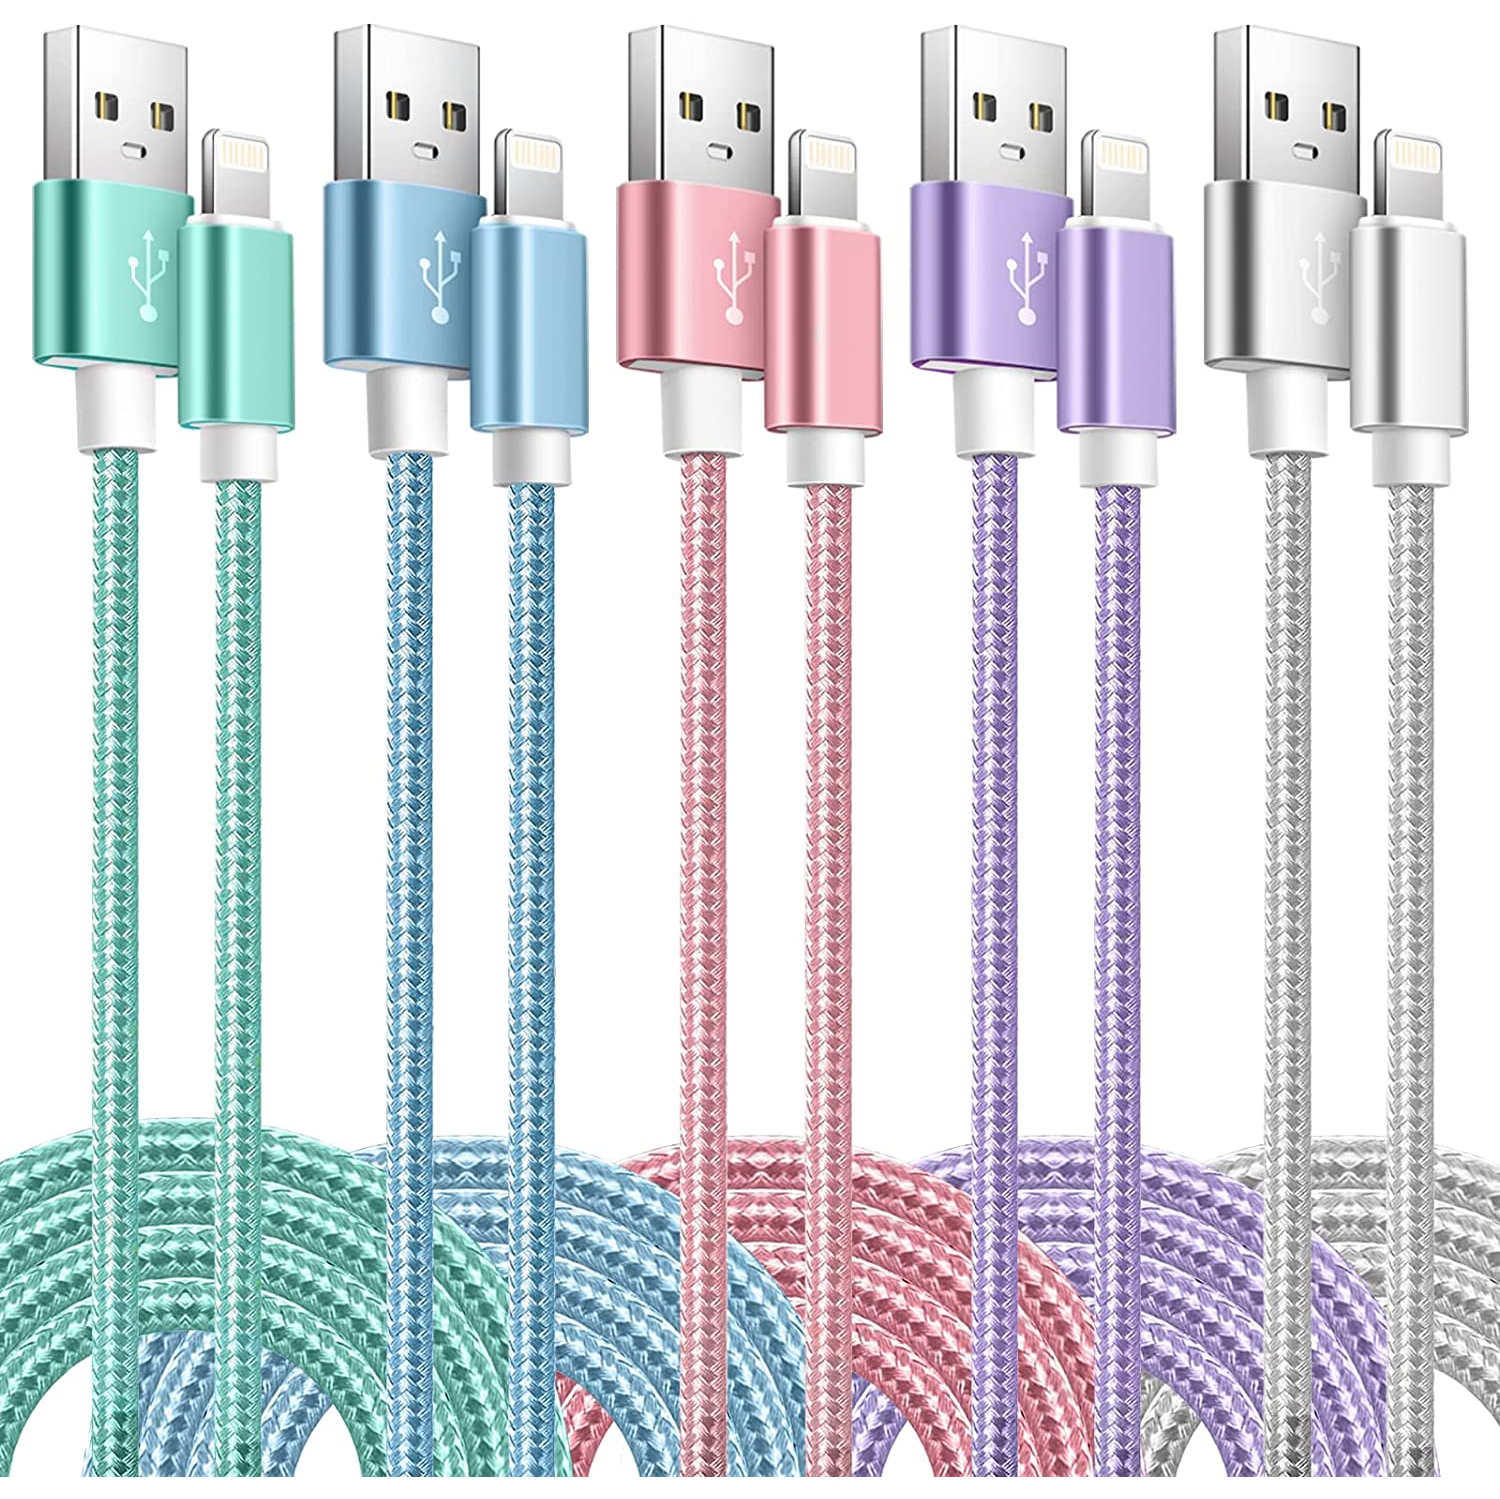 iPhone Charger Cord 5Pack (3/3/6/6/10FT) 5 Colors MFi Certified Nylon Braided iPhone Charging Cable Compatible with iPhone 13 12 Pro Max Mini 11 XR XS X 8 7 6s 6 Plus-Green/Blue//